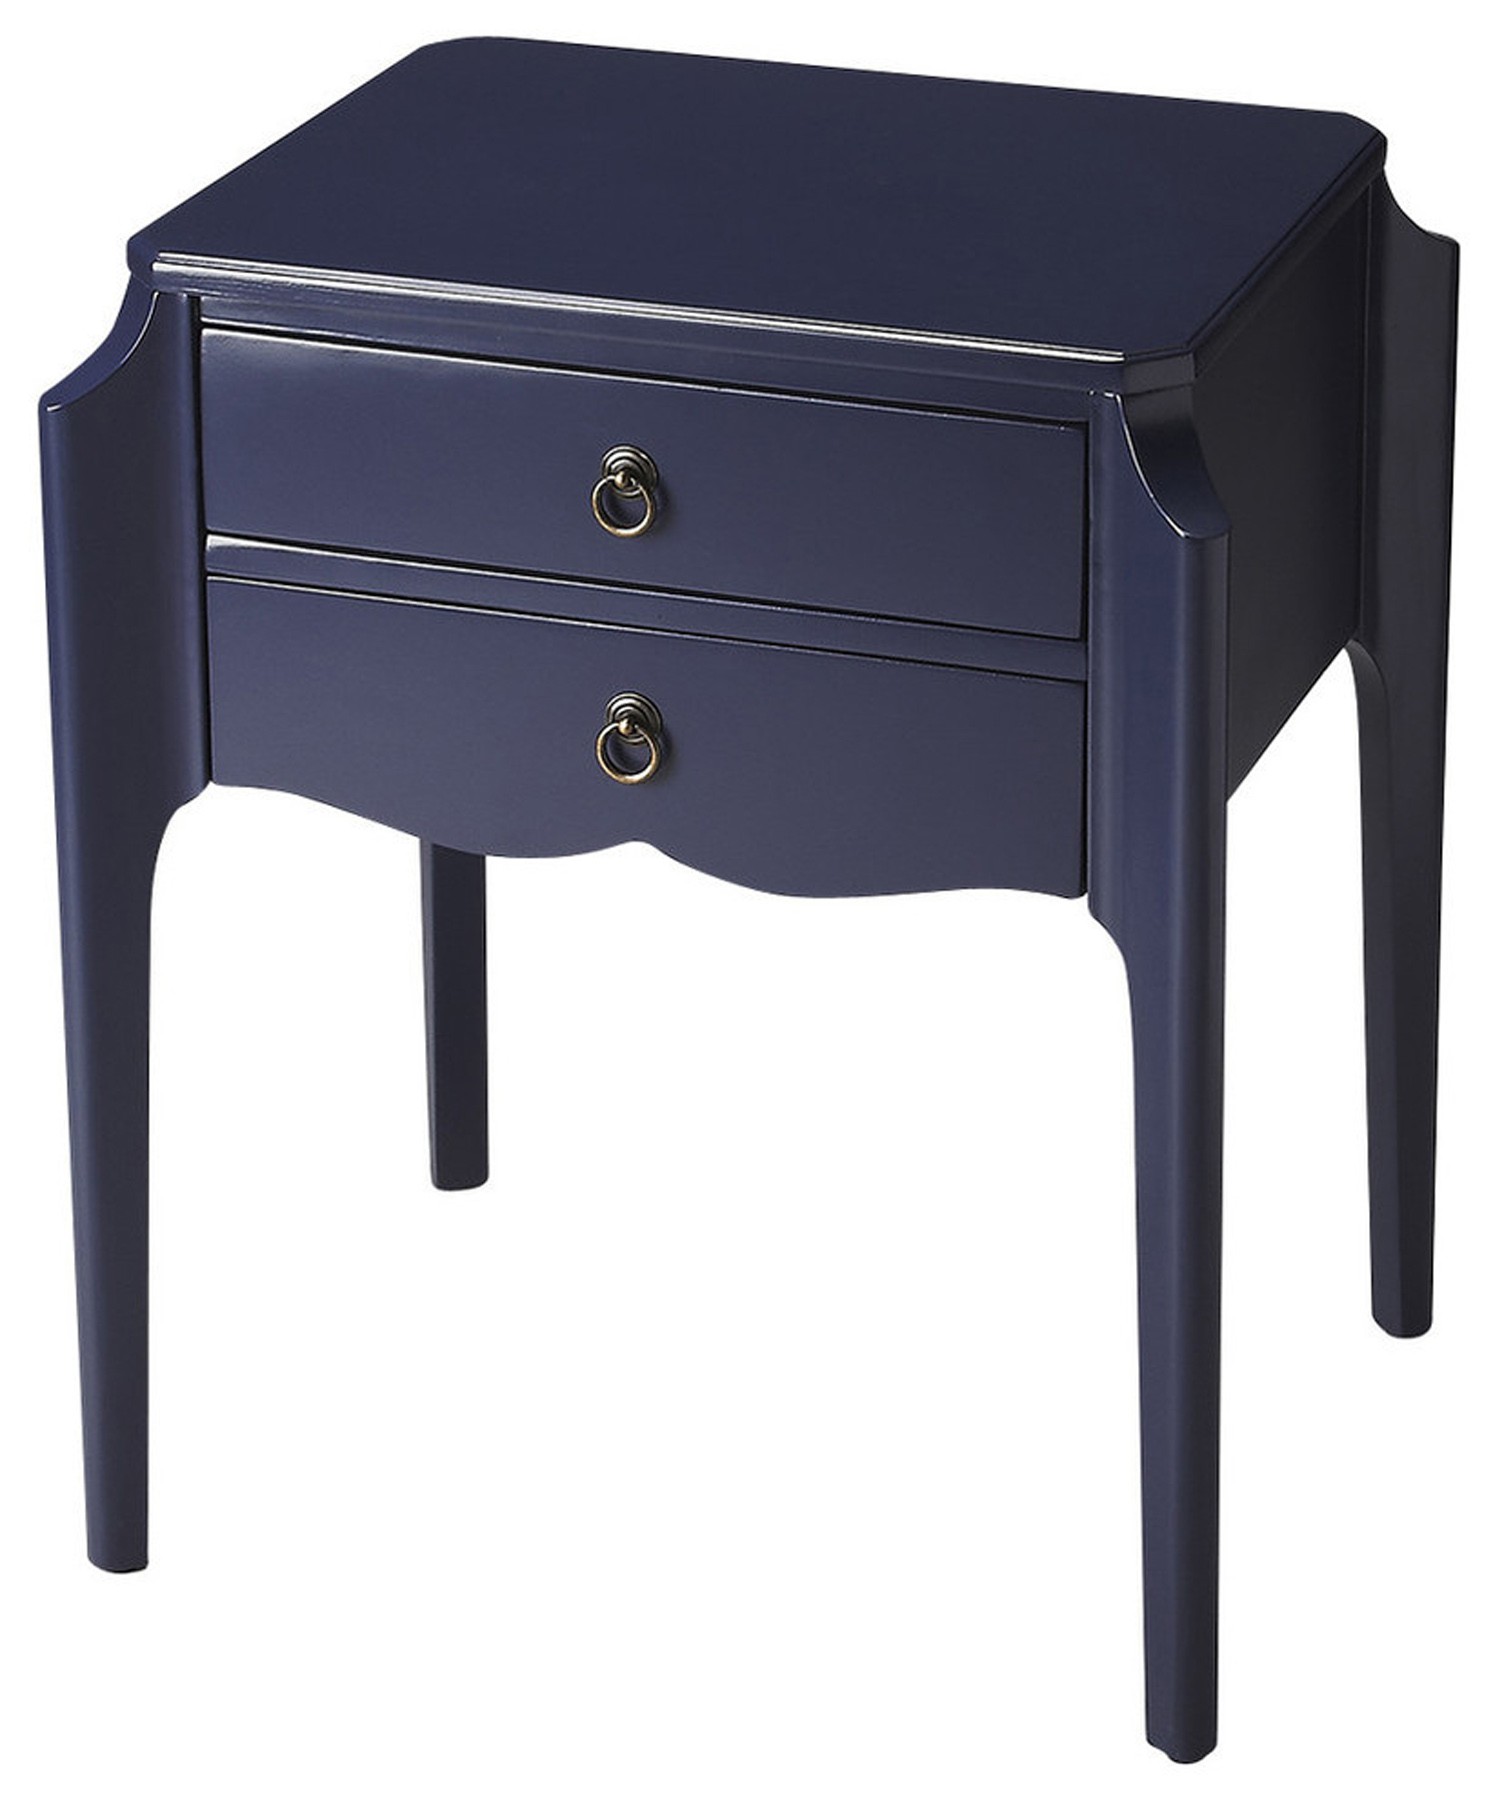 butler specialty navy blue wilshire two drawer accent shaped table tables bedroom console porcelain lamp modern rustic wood coffee with storage small white gloss round entryway